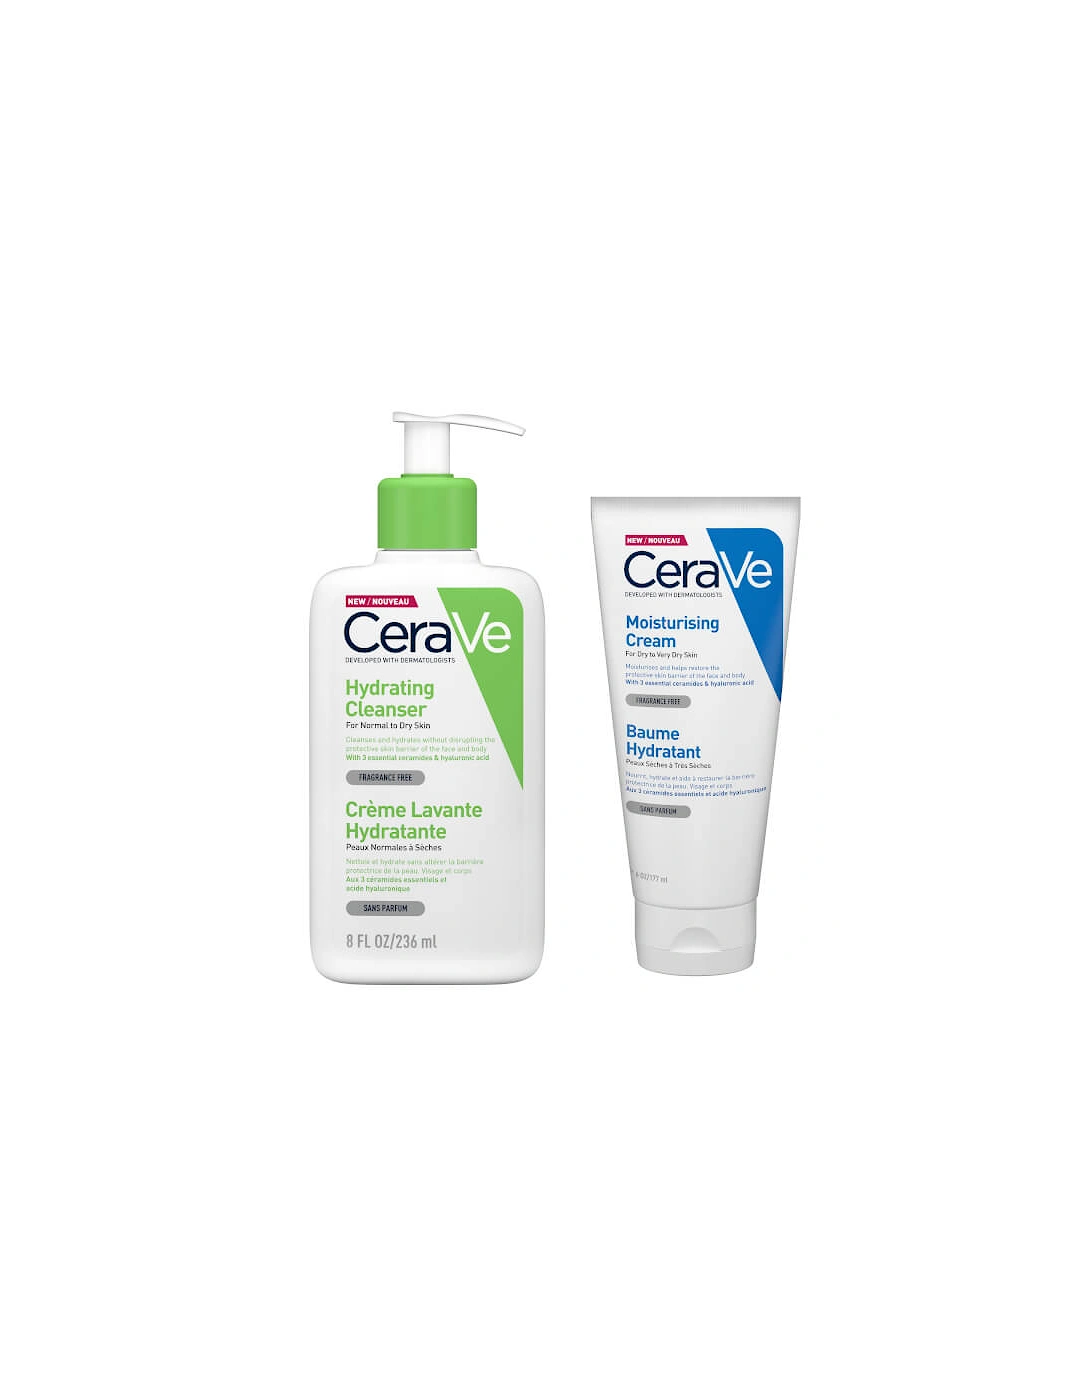 Best Sellers Duo - CeraVe, 2 of 1